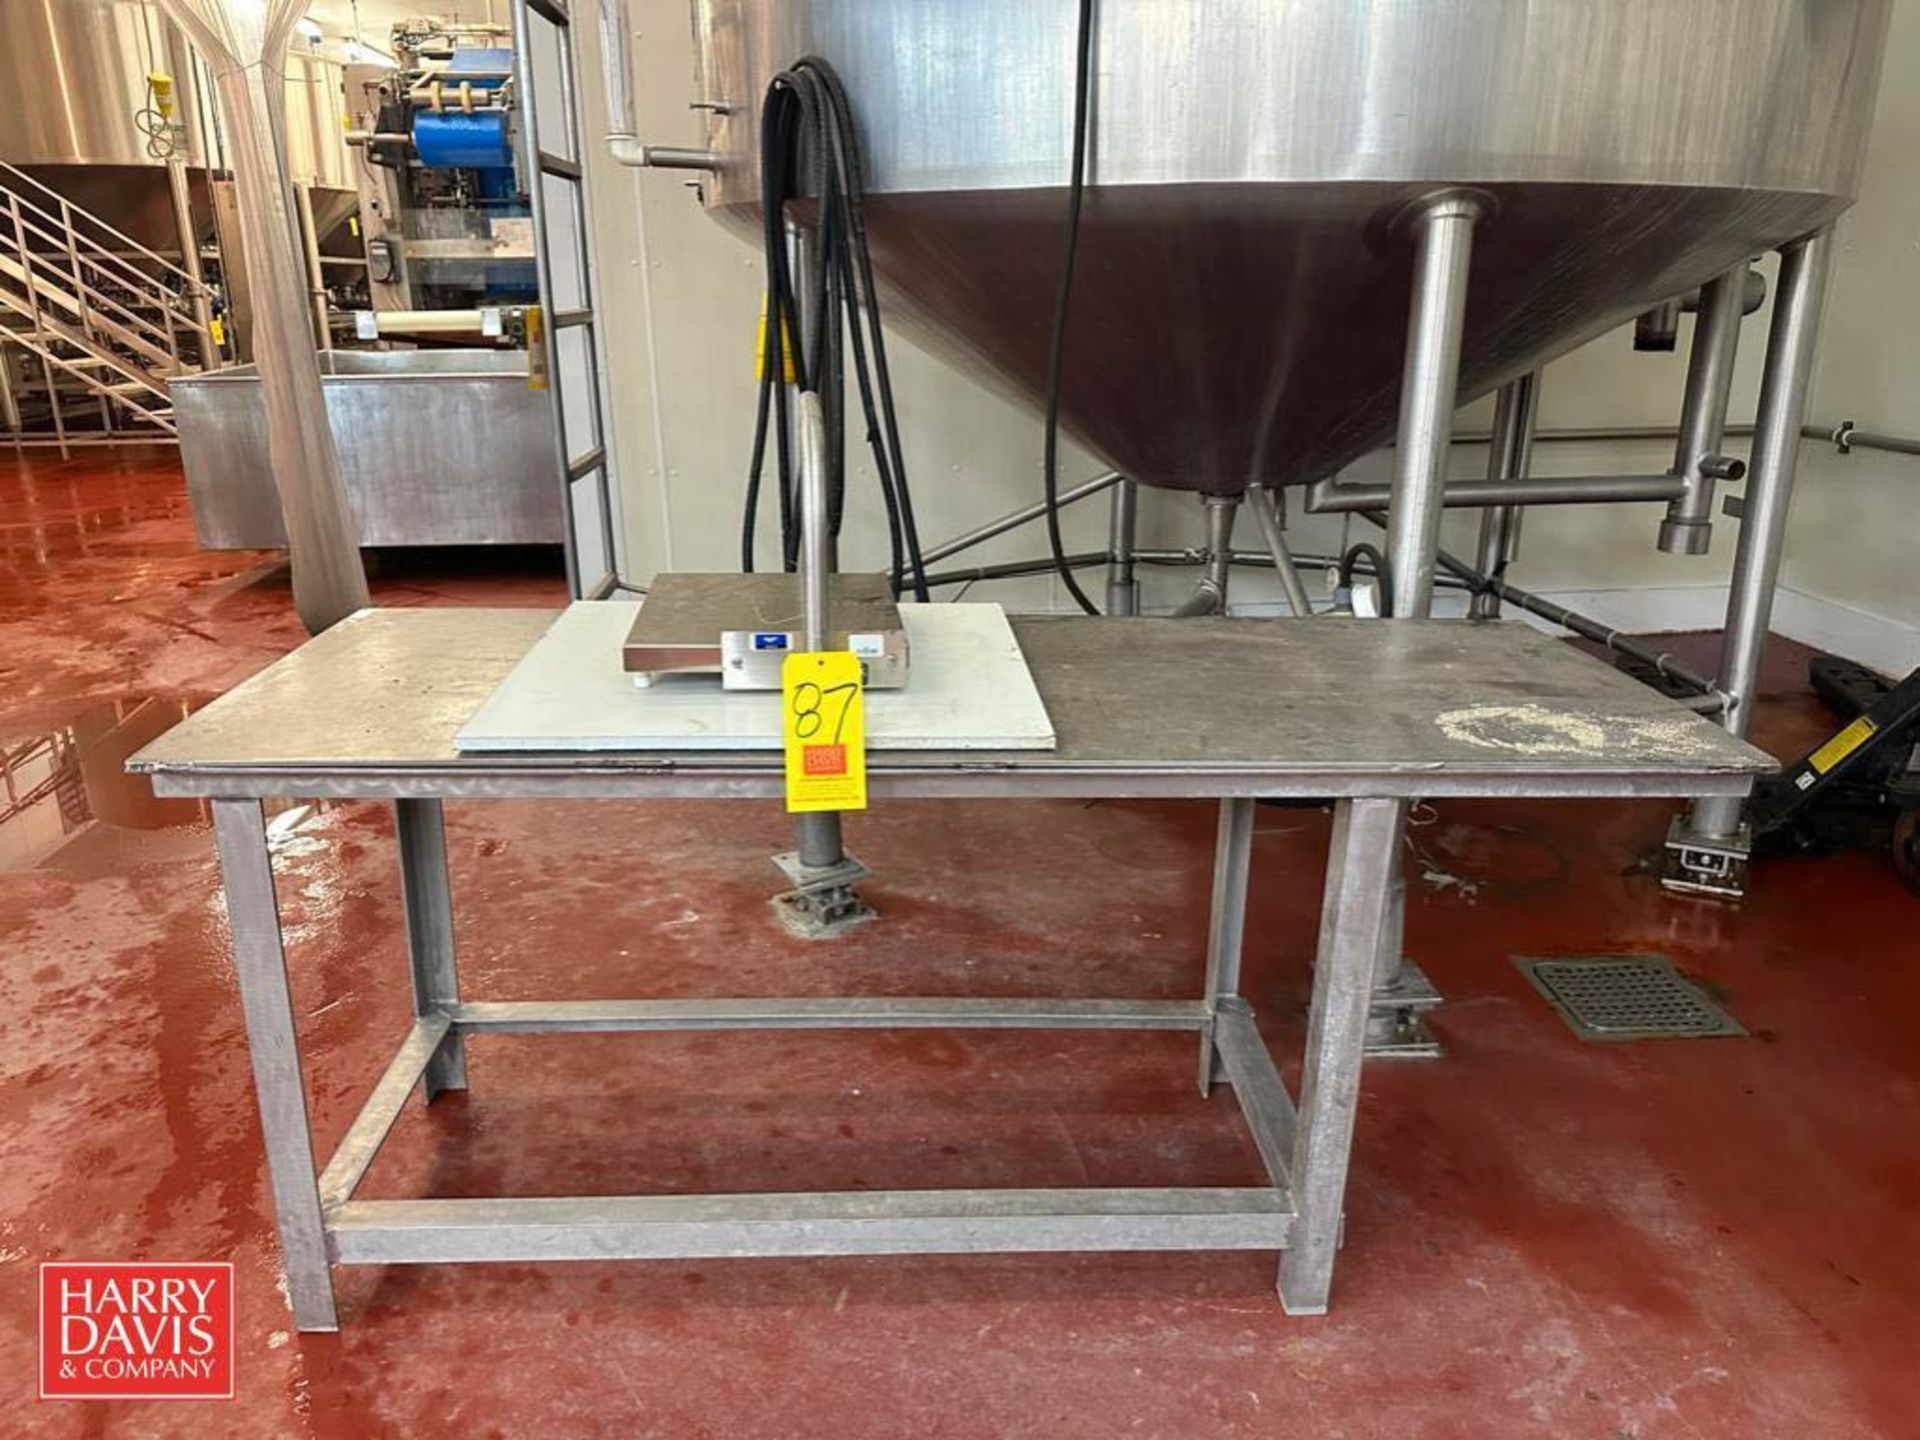 Vollrath S/S Cheese Slicer: 15" x 1’ with S/S Table: 65" x 2'